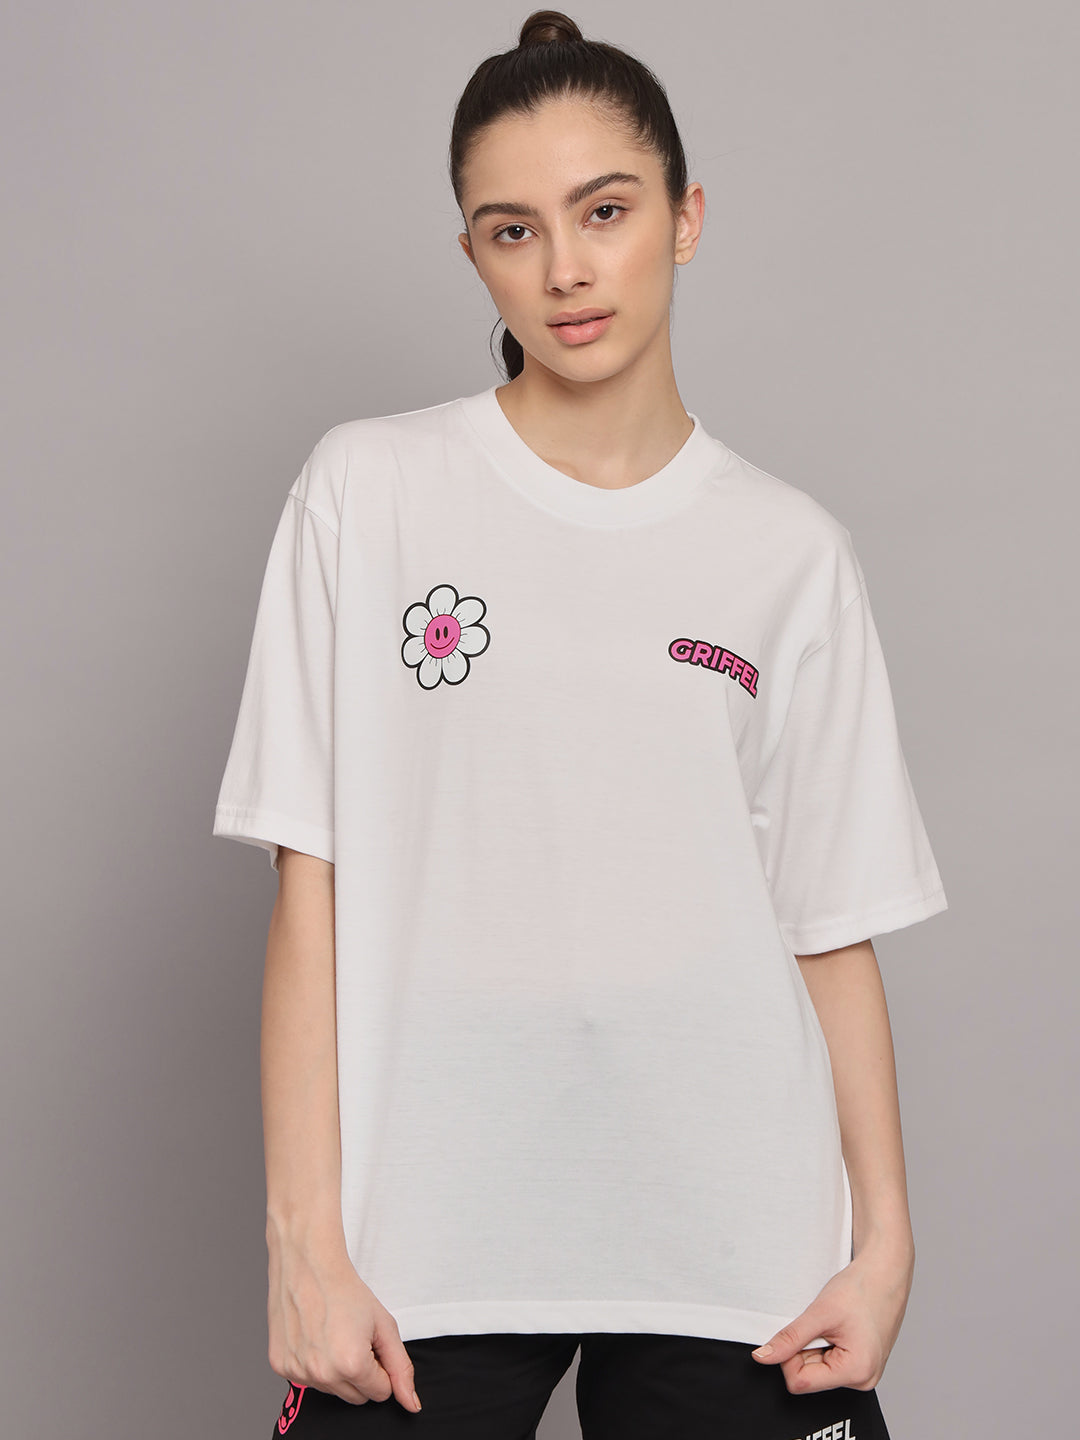 GRIFFEL Women Printed Loose fit White T-shirt - griffel